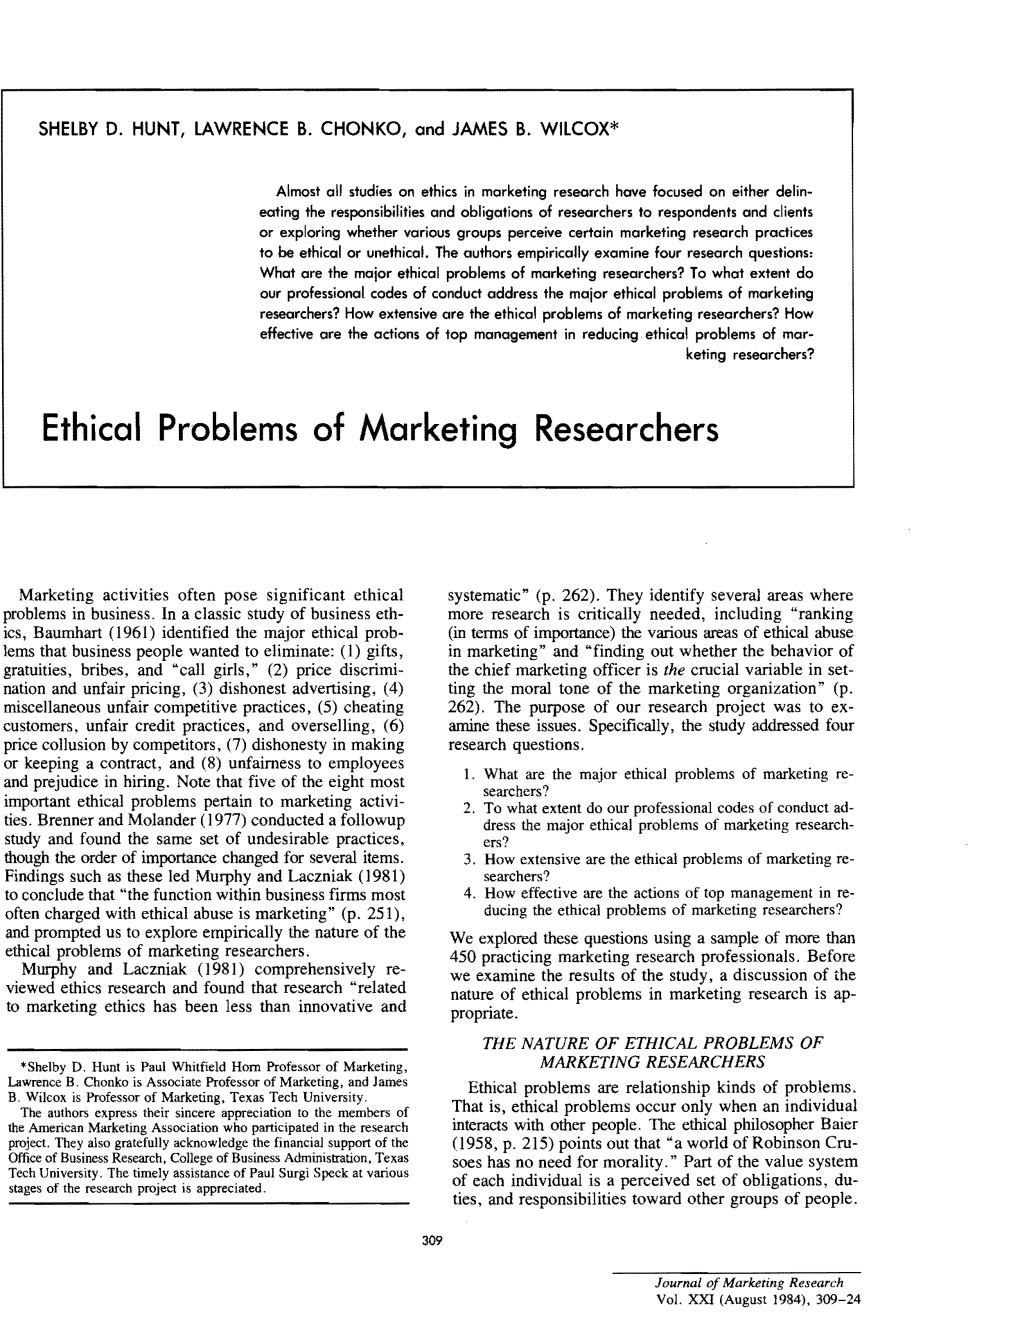 Ethical Problems of Marketing Researchers